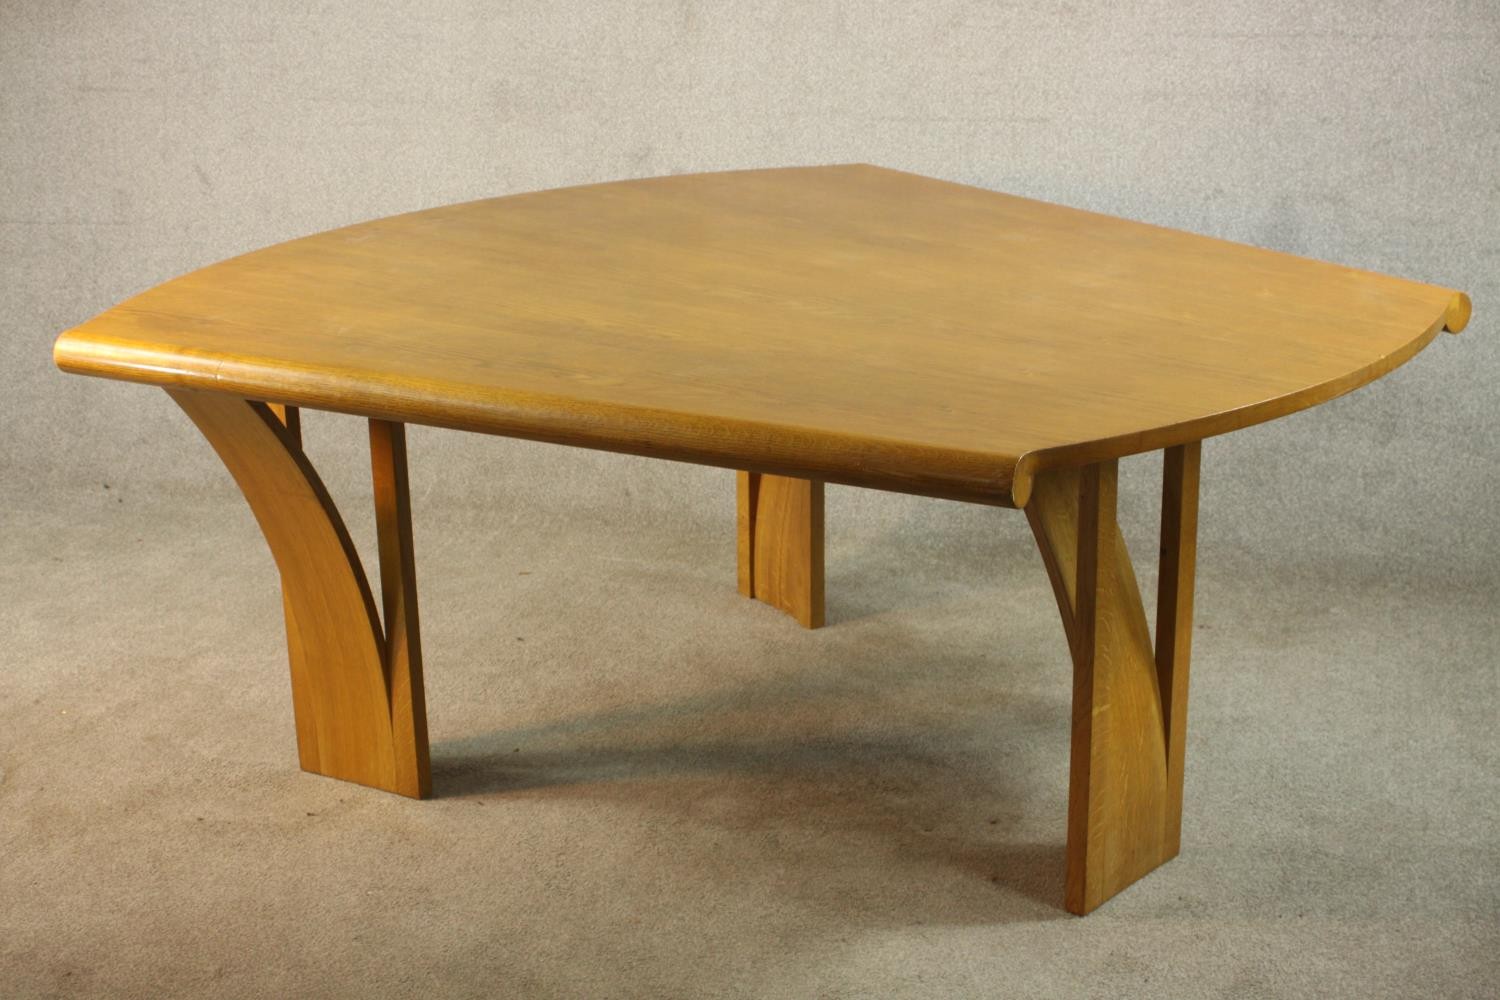 Attributed to Robert Williams (b.1942) for Pearl Dot, Islington, an oak dining table, circa 1980s, - Image 3 of 15